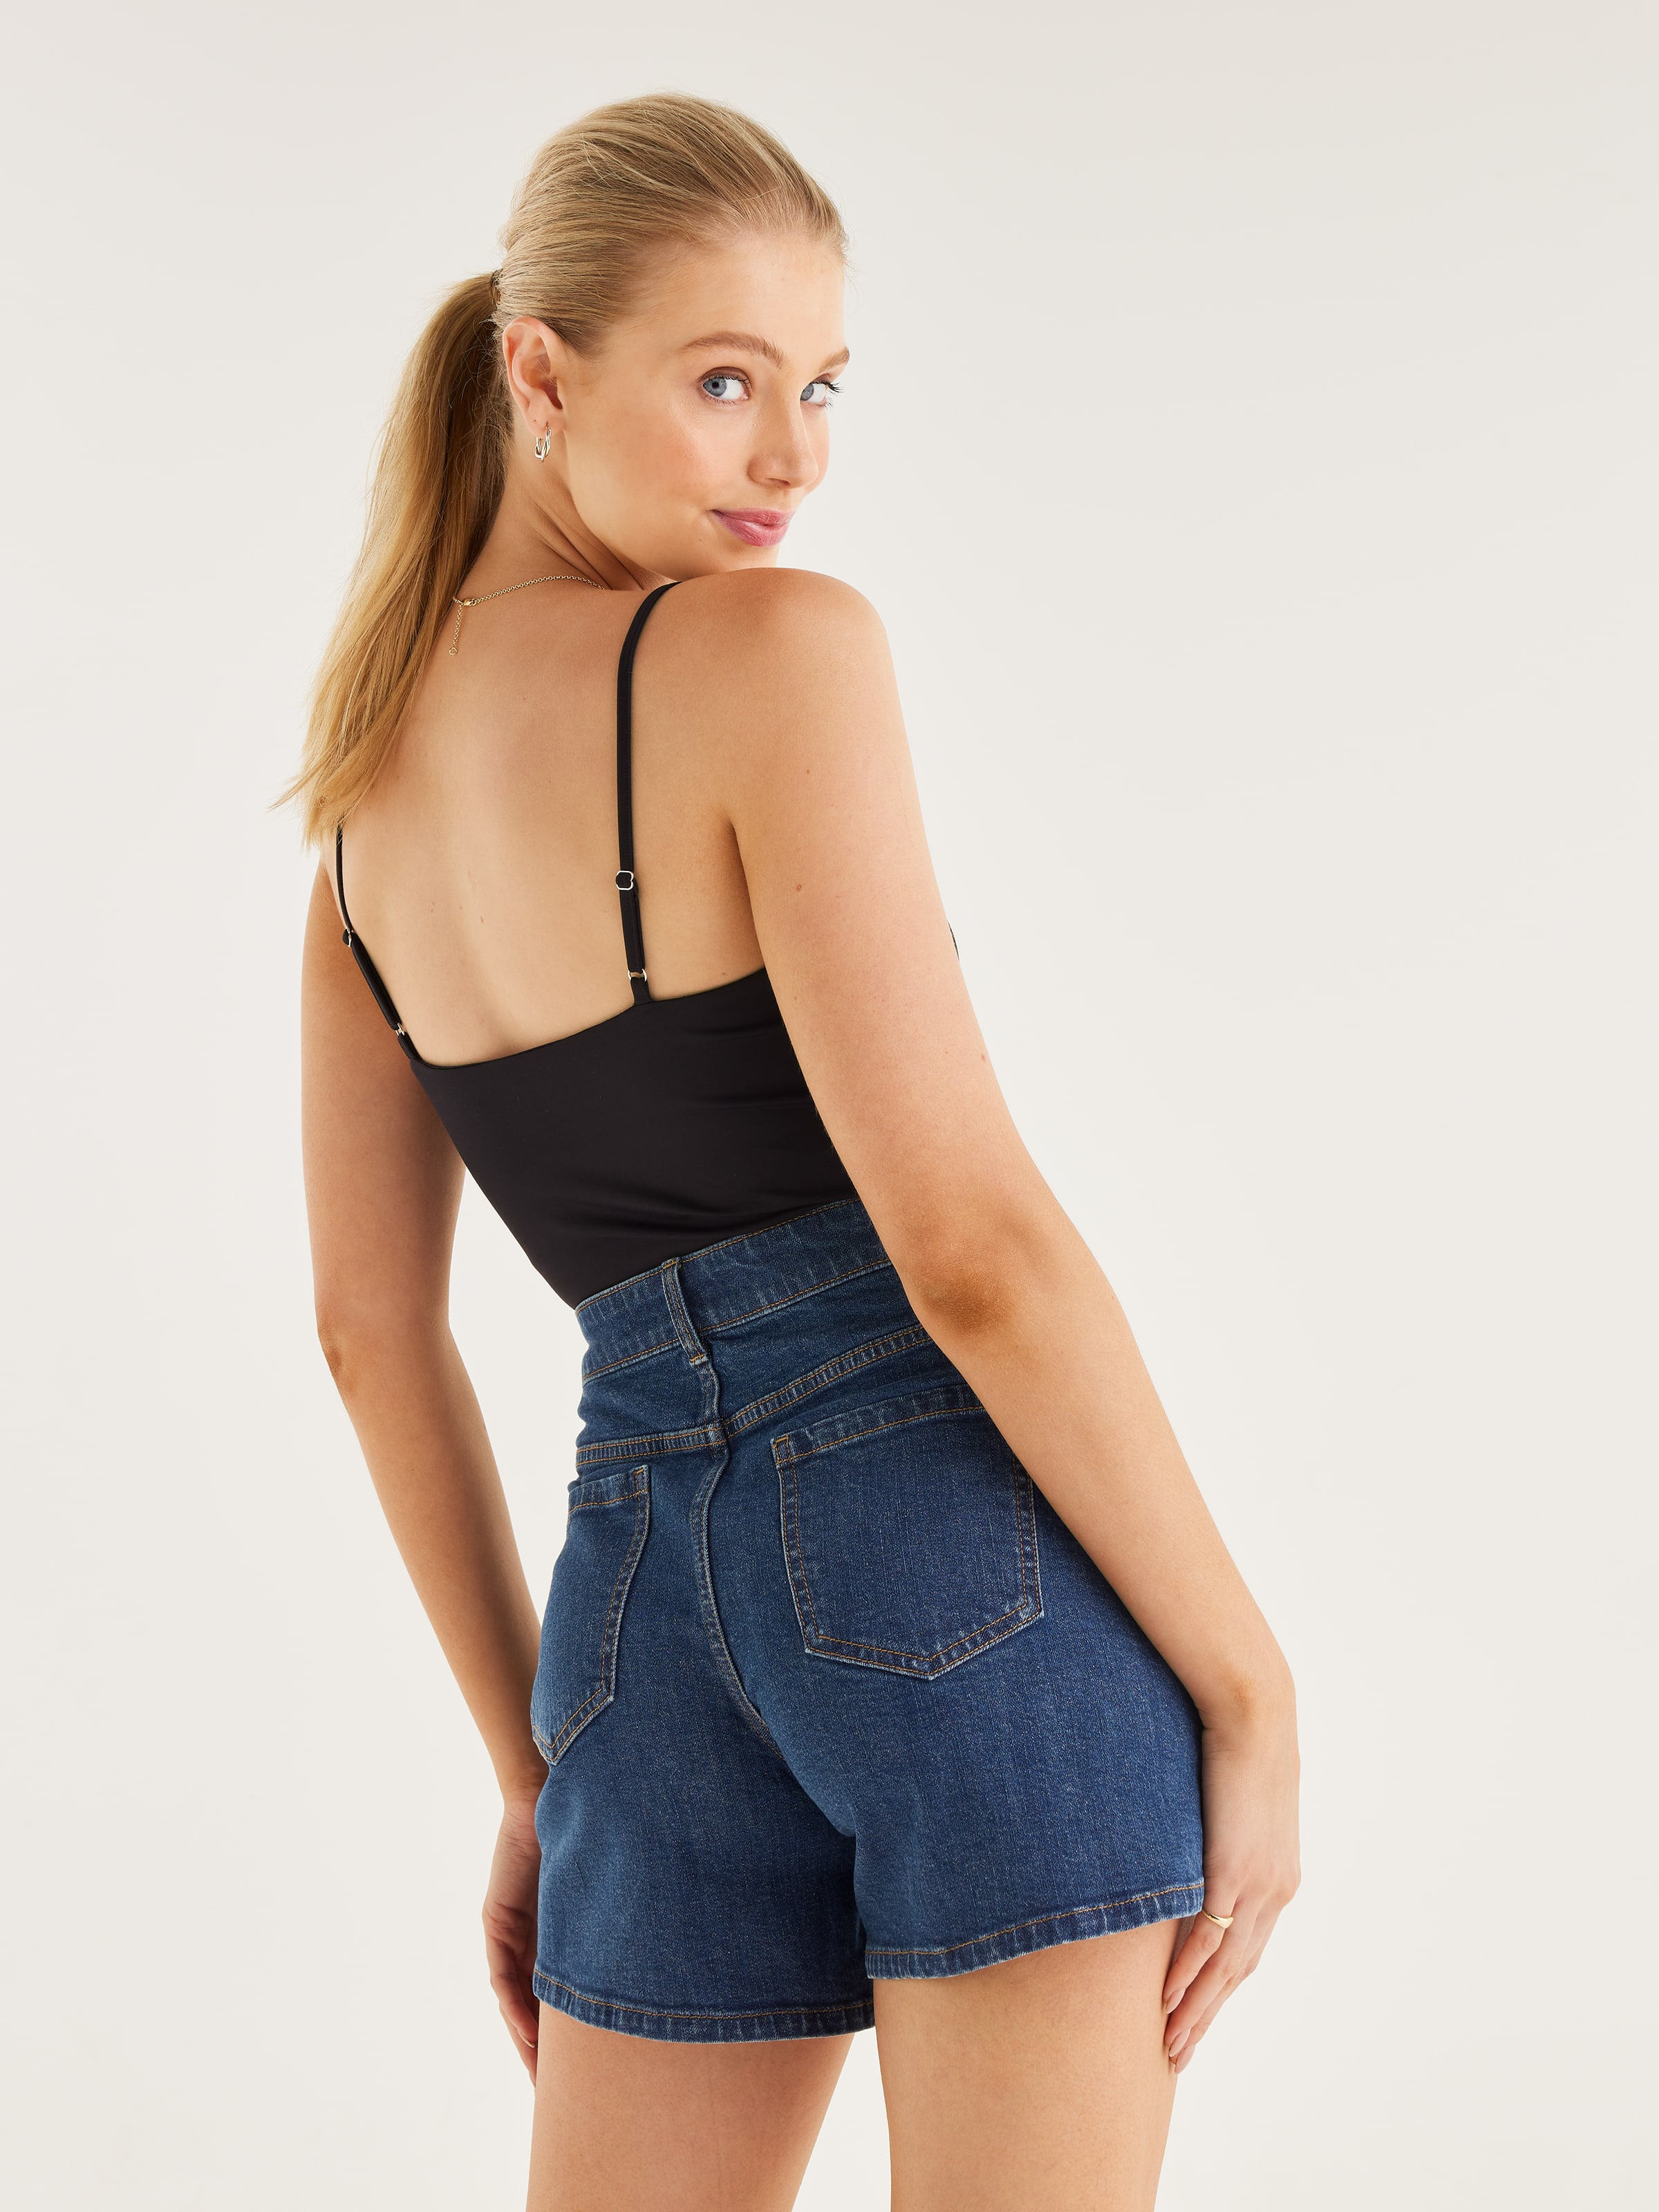 High Rise Shorts - Buy High Rise Shorts online in India-nextbuild.com.vn